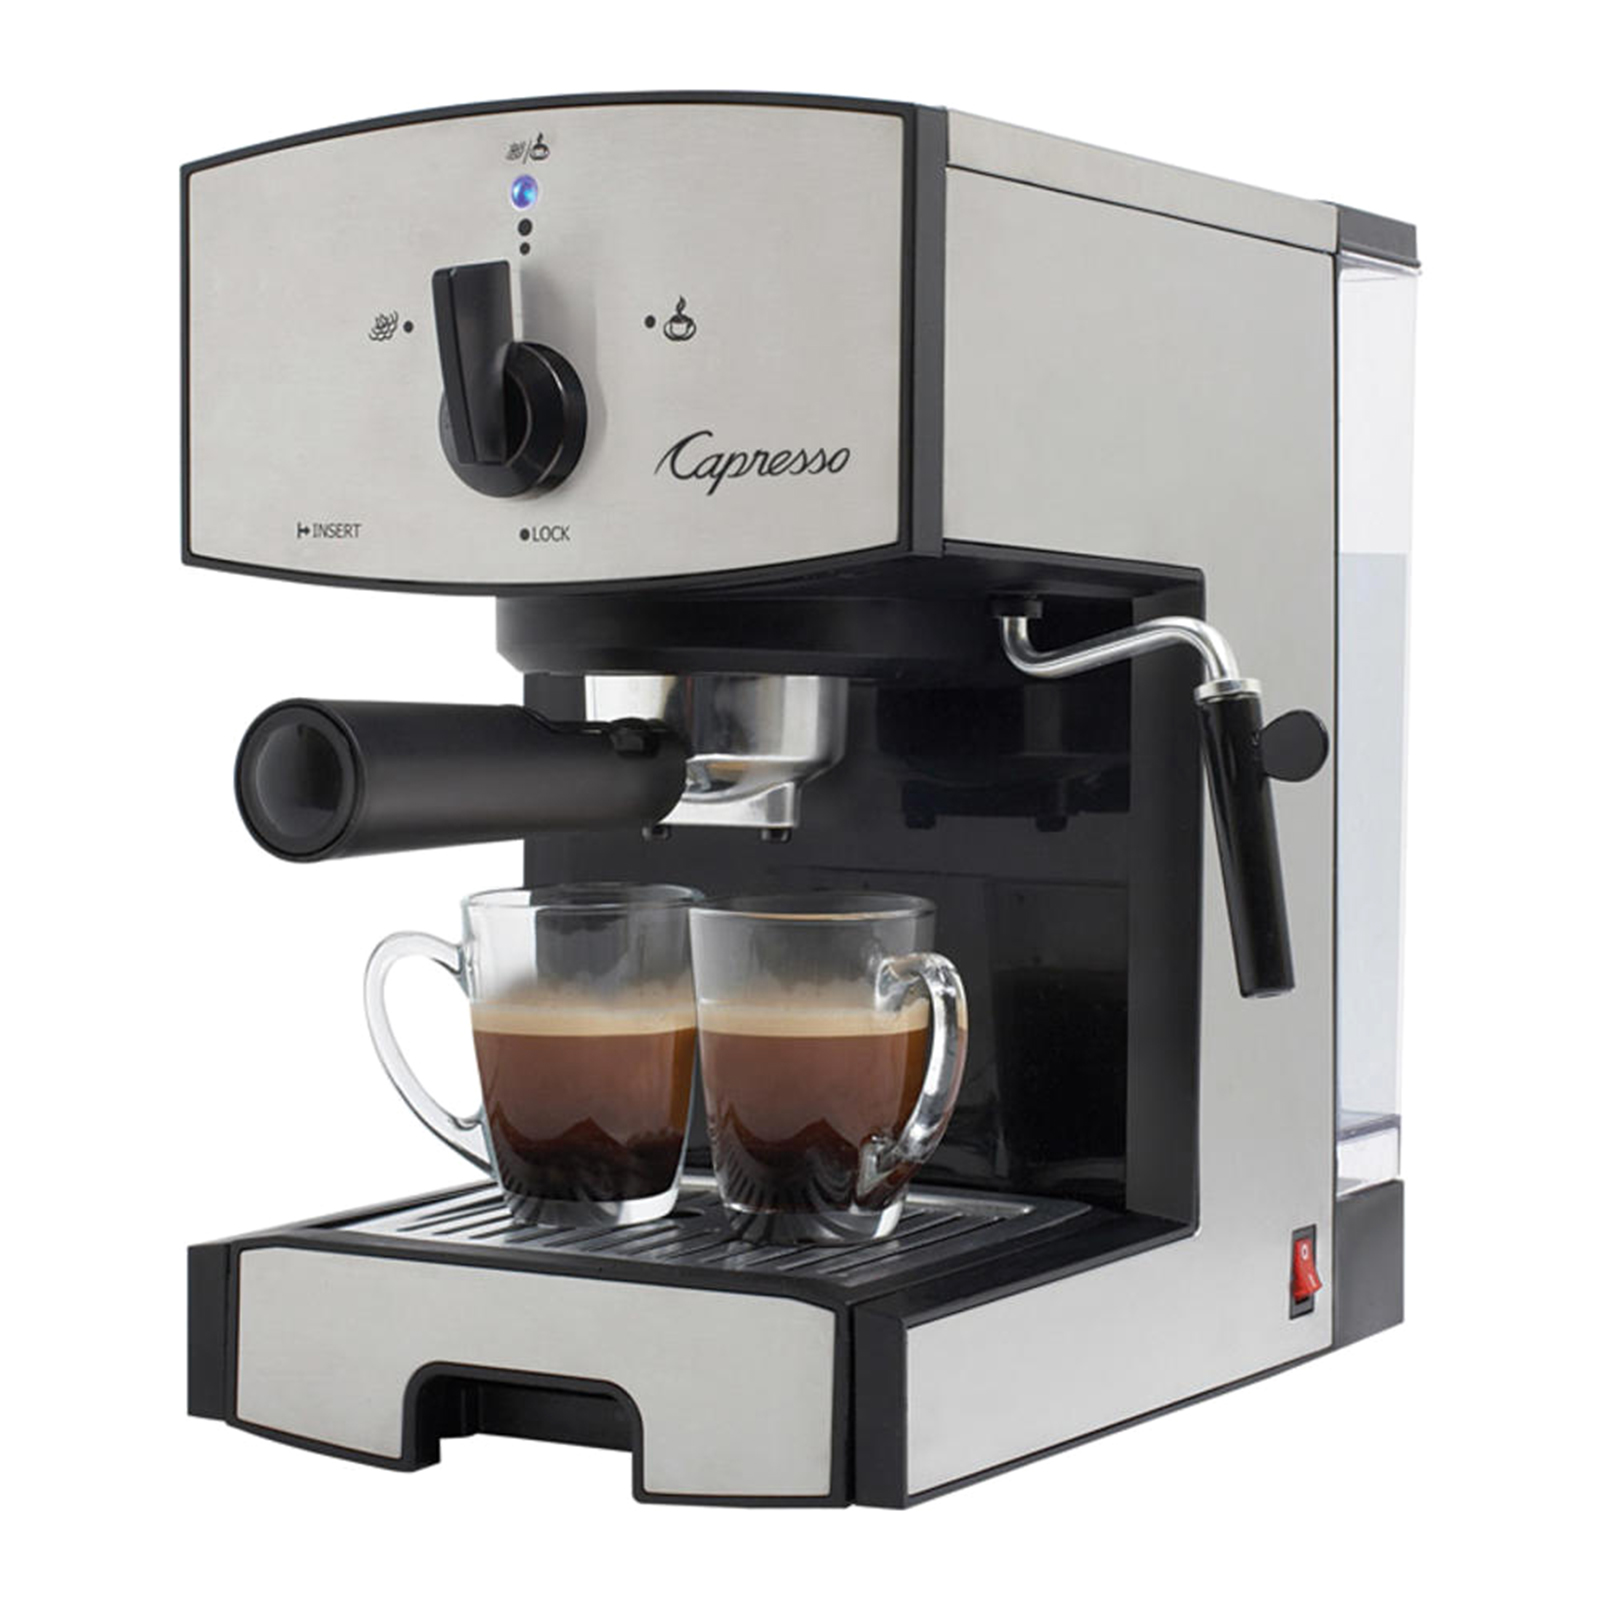 Capresso 117.05 42oz. Espresso/Cappuccino Maker with Stainless-Steel Pump - Black and Silver